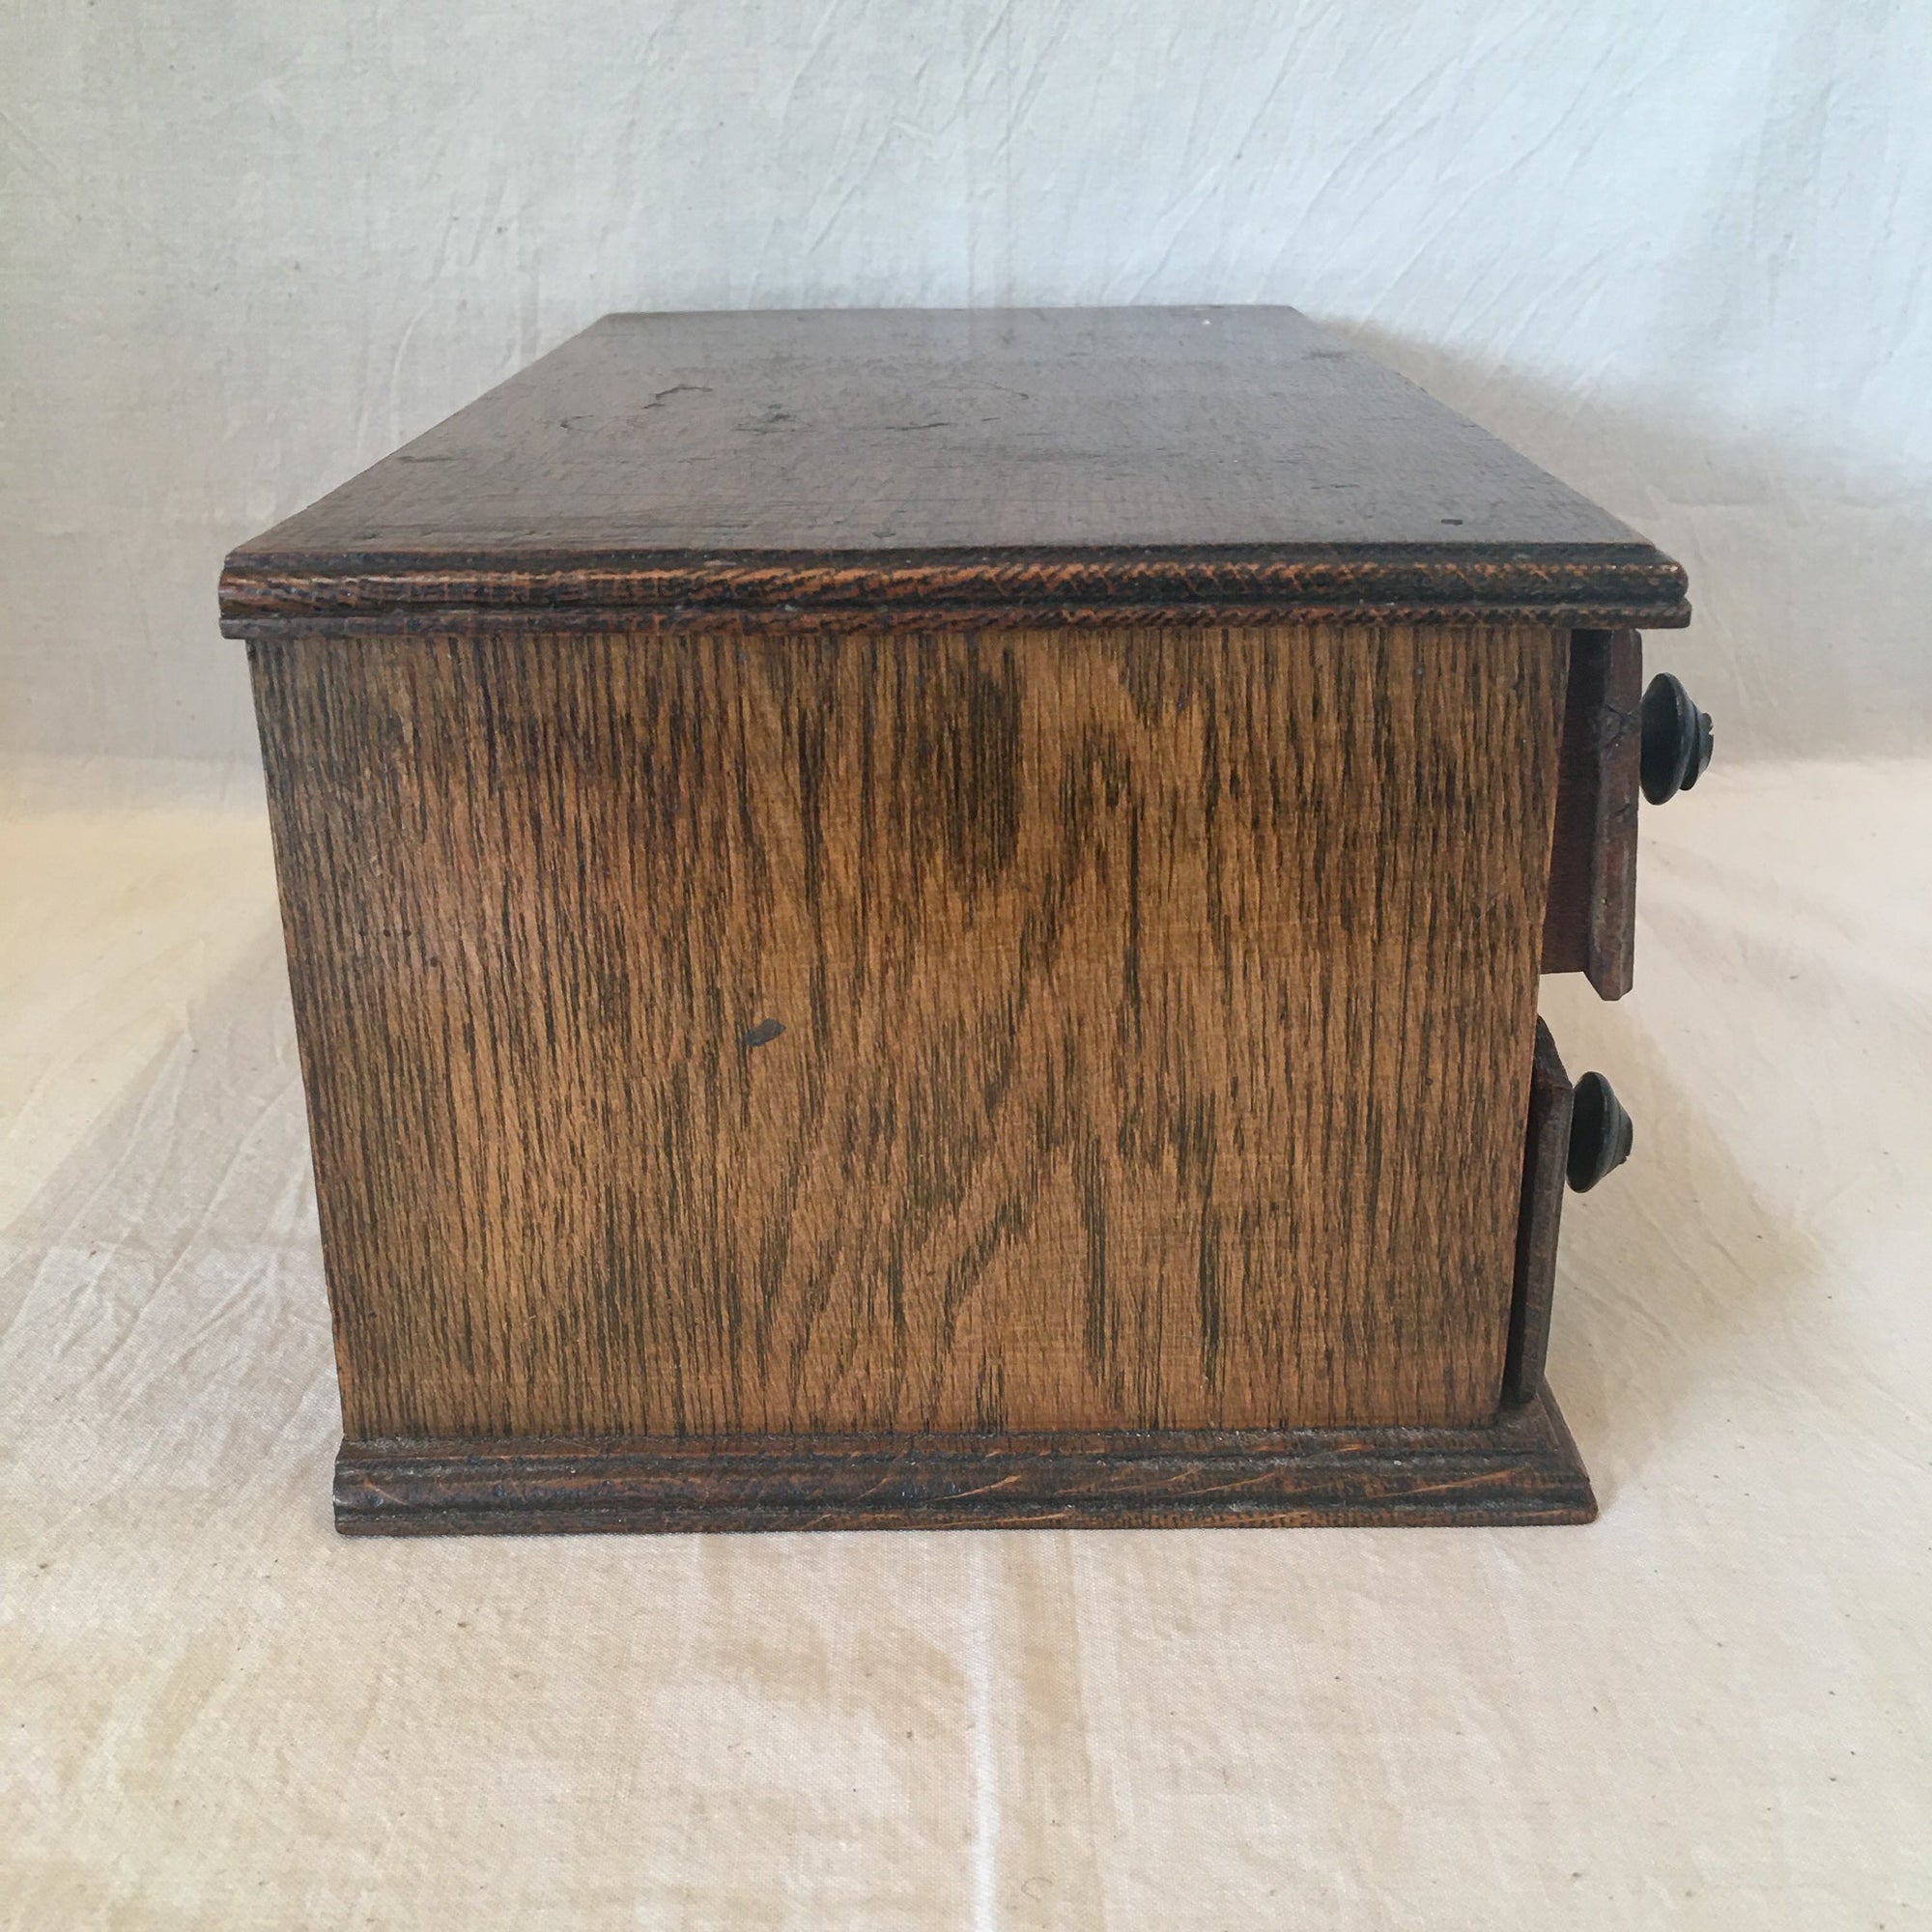 1910’s American Needle Co’s Needle Cabinet, Store Counter Display